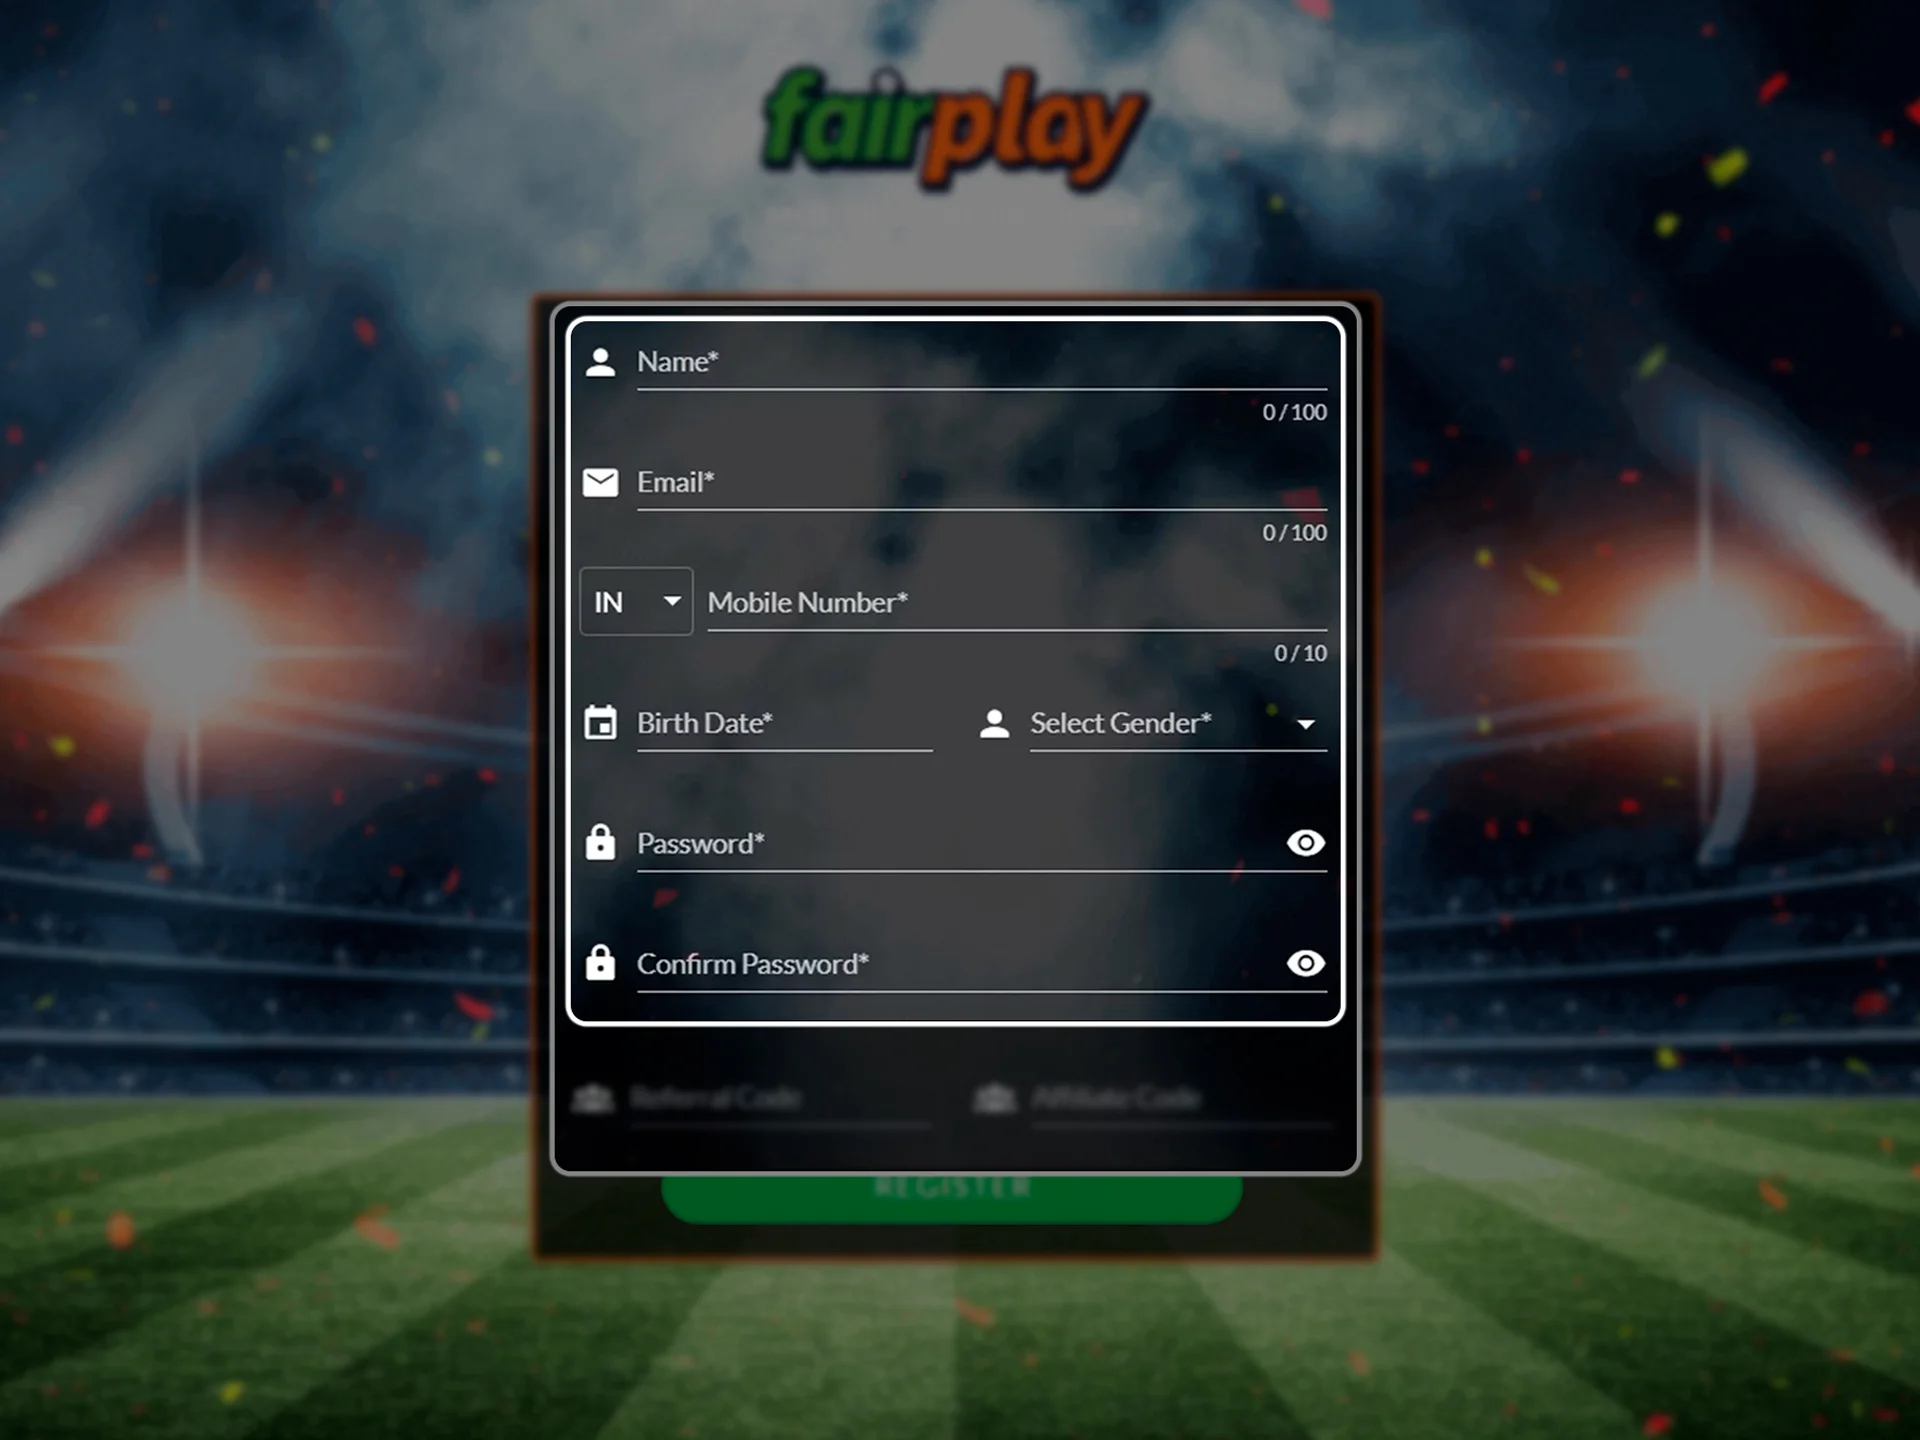 To join Fair Play, follow the link and create a profile.